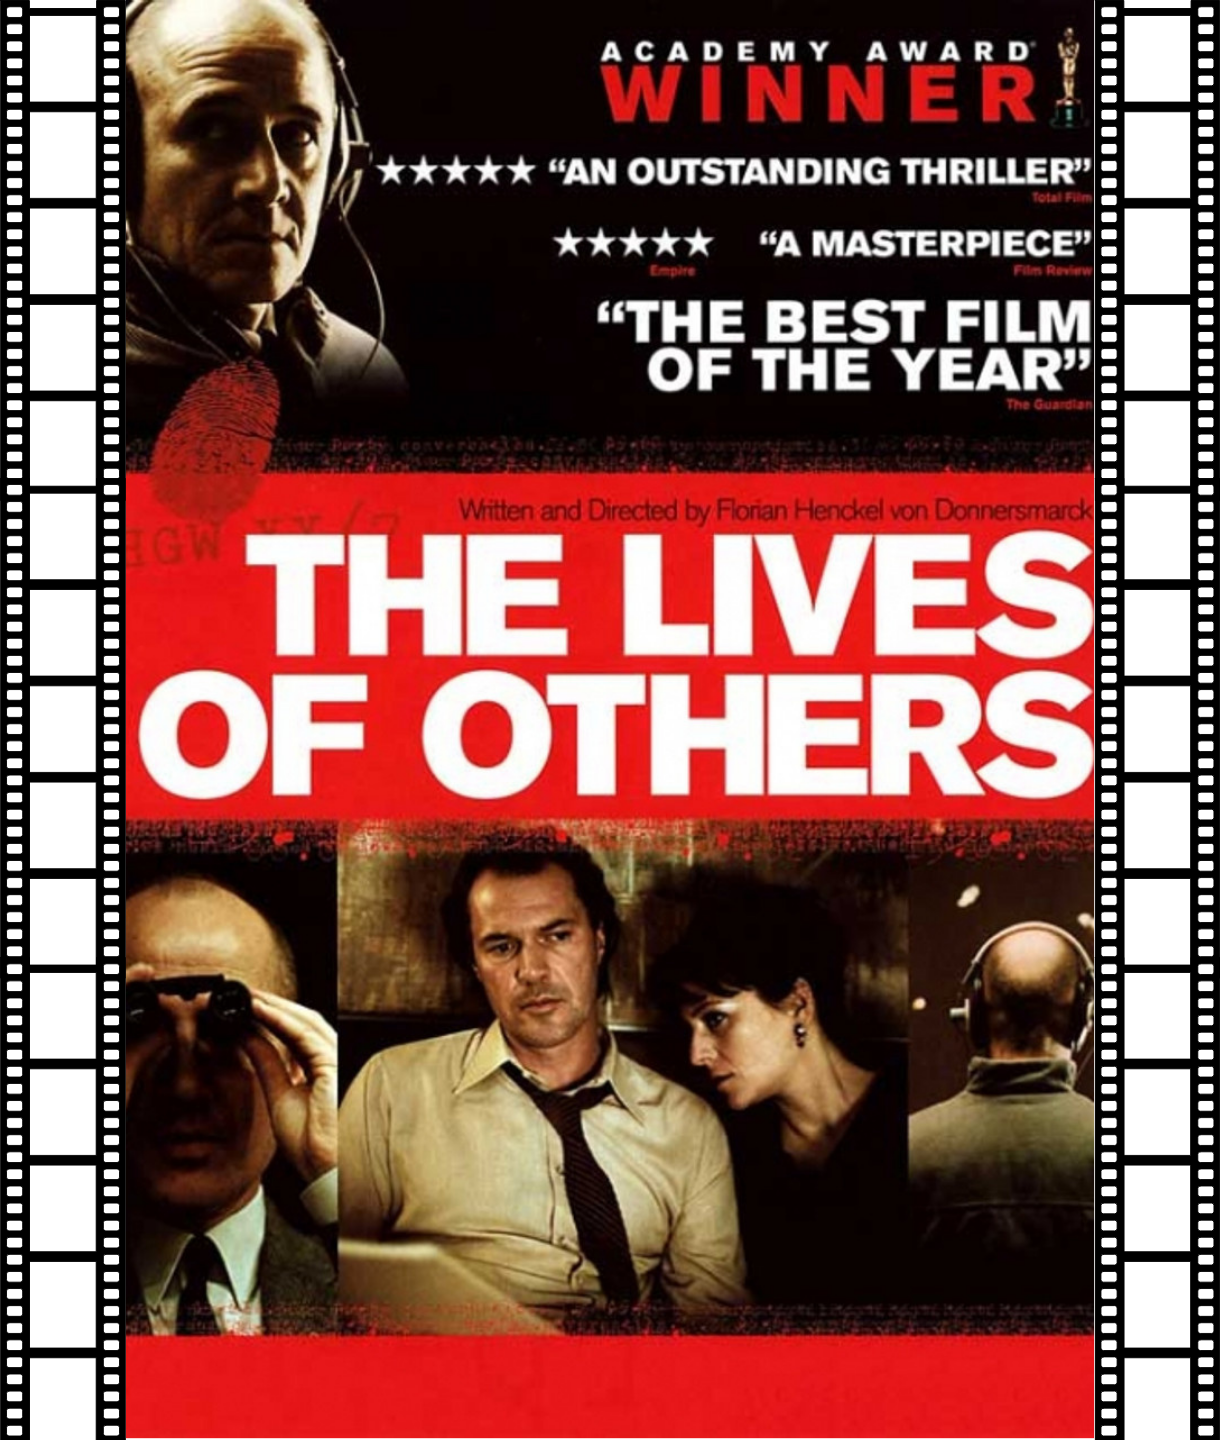 The Lives of Others (15) Poster Image